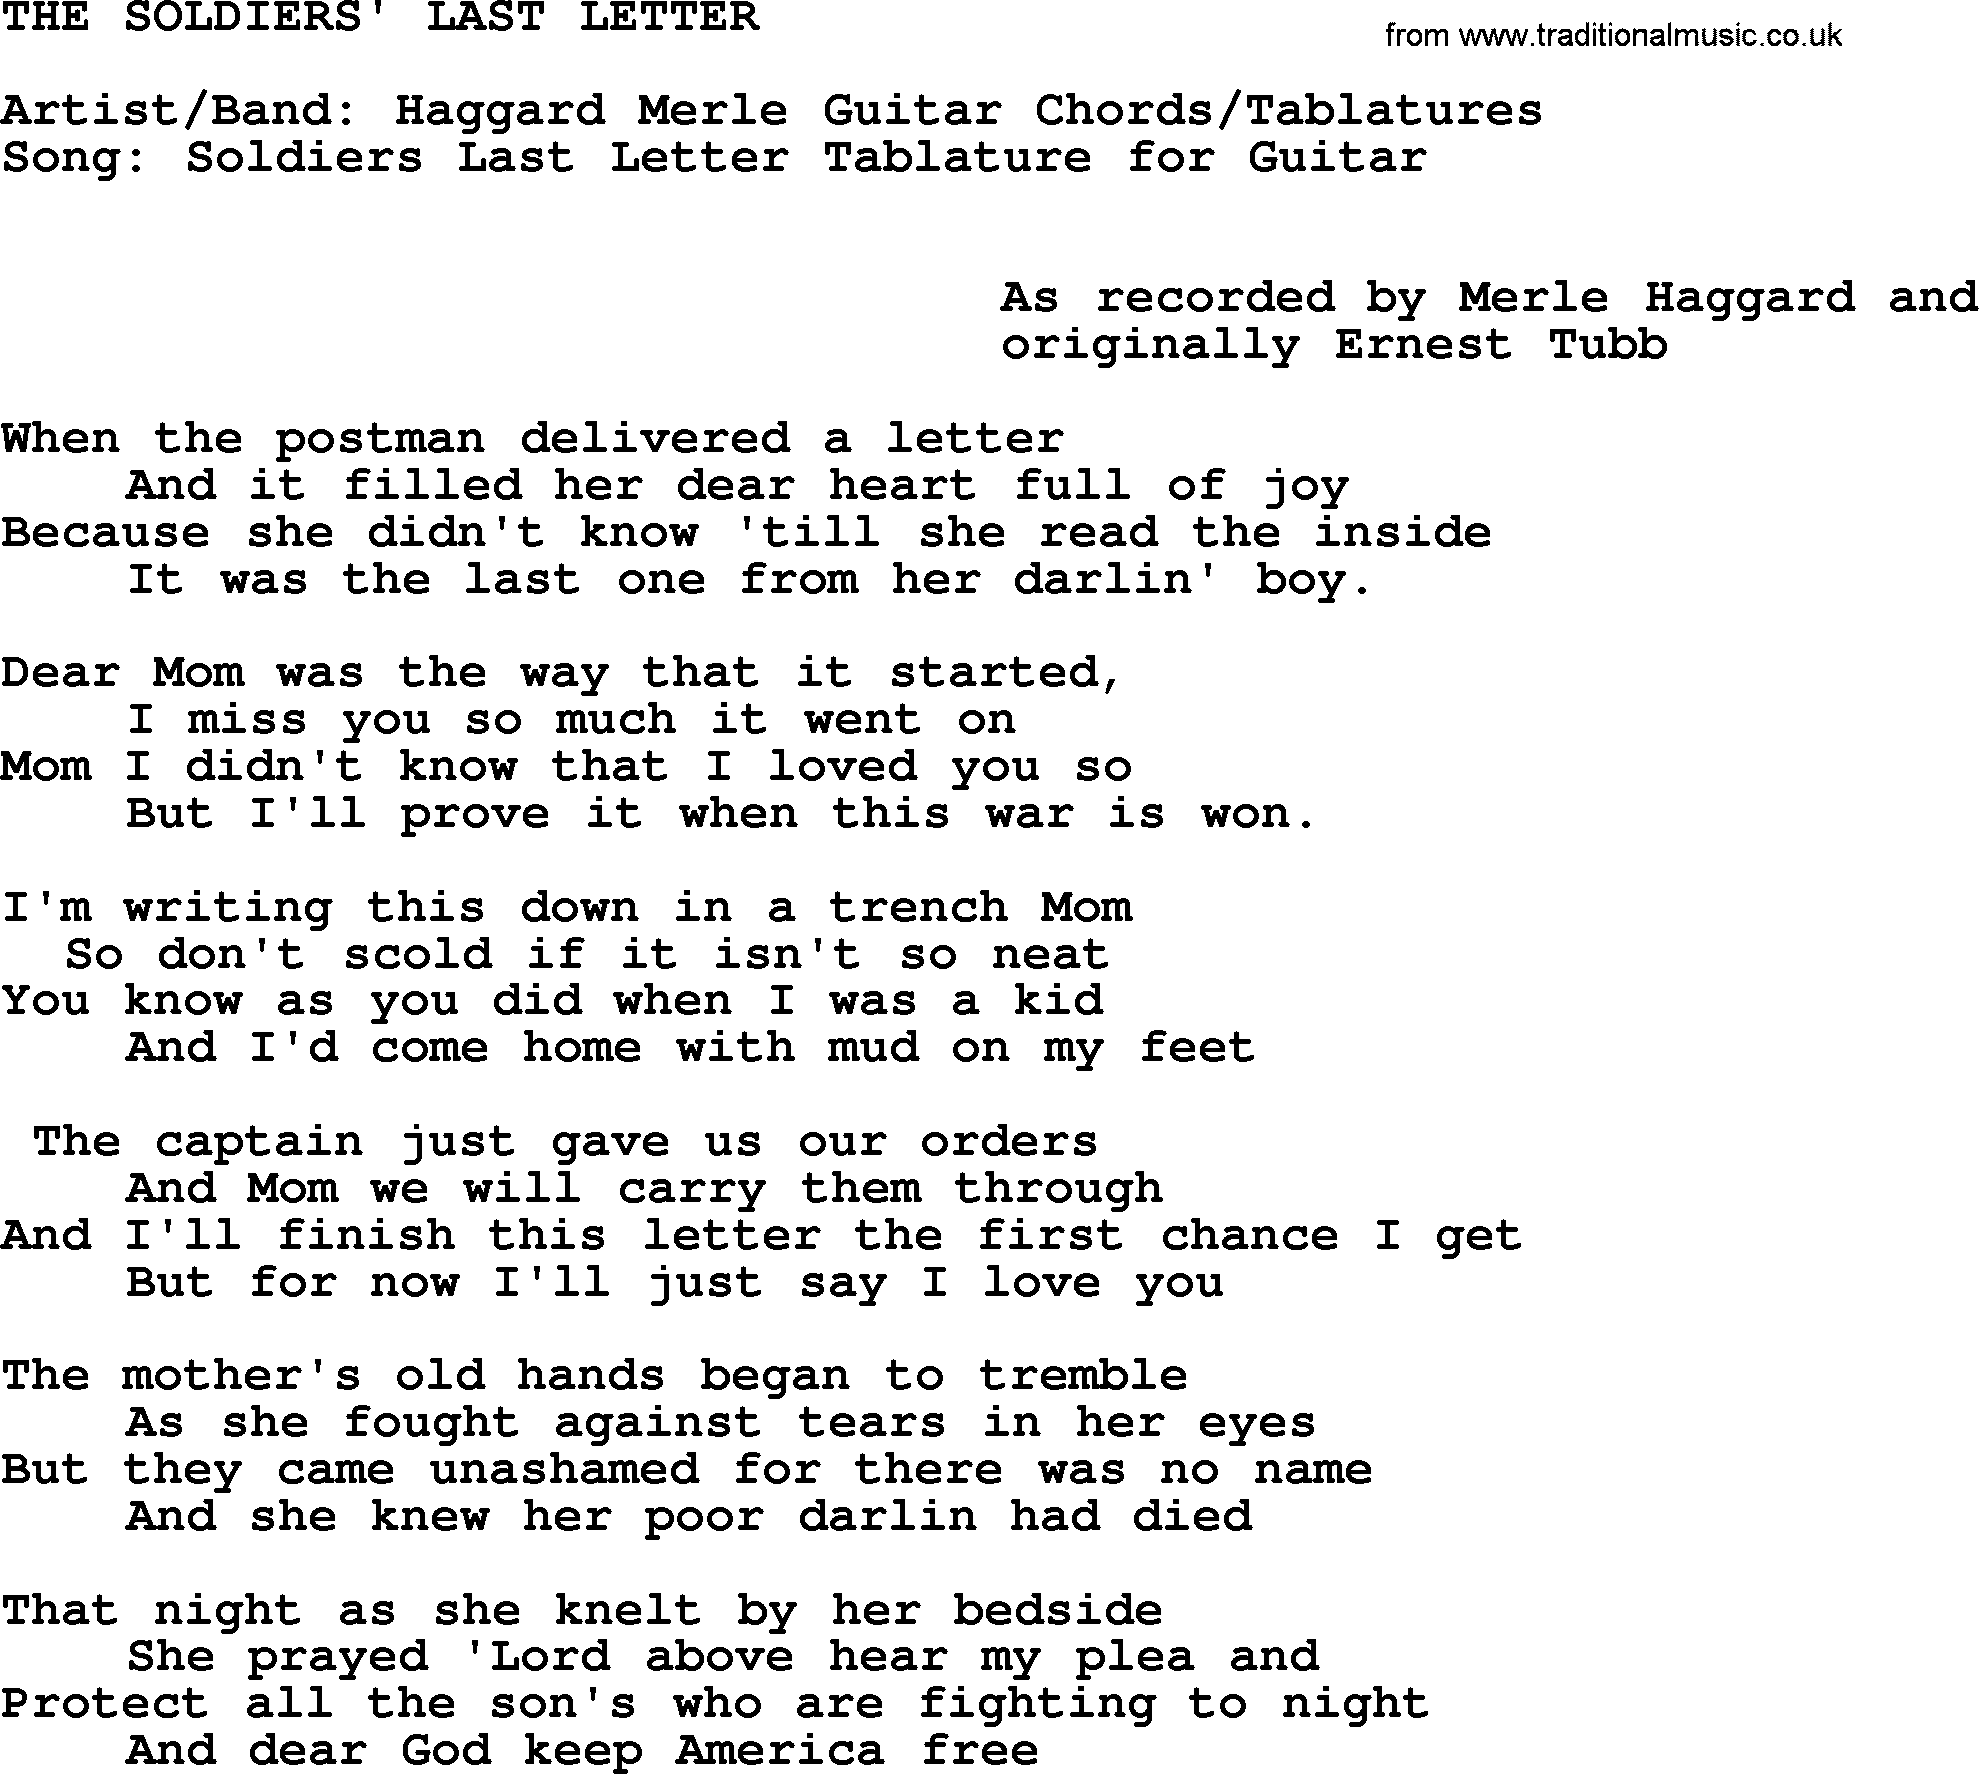 Merle Haggard song: The Soldiers' Last Letter, lyrics.